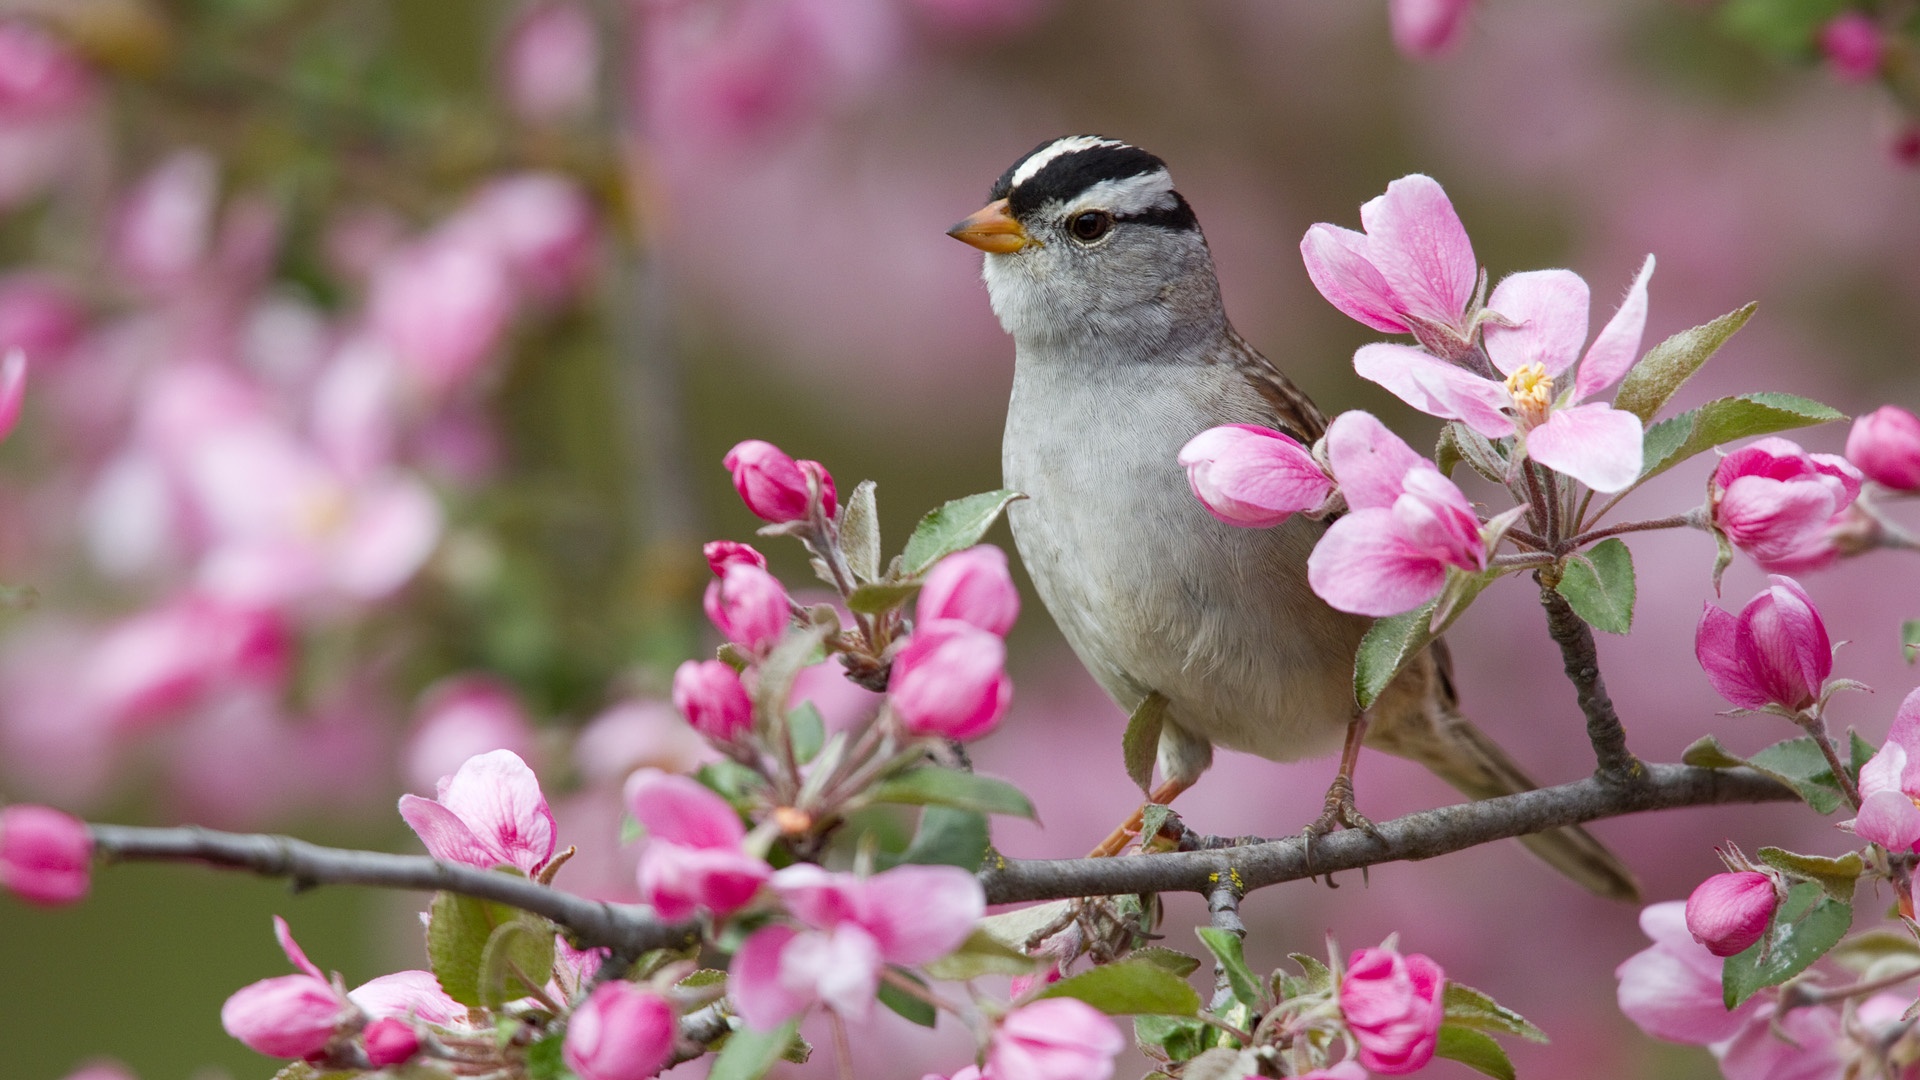 Gallery for   bird and flowers wallpaper 1920x1080